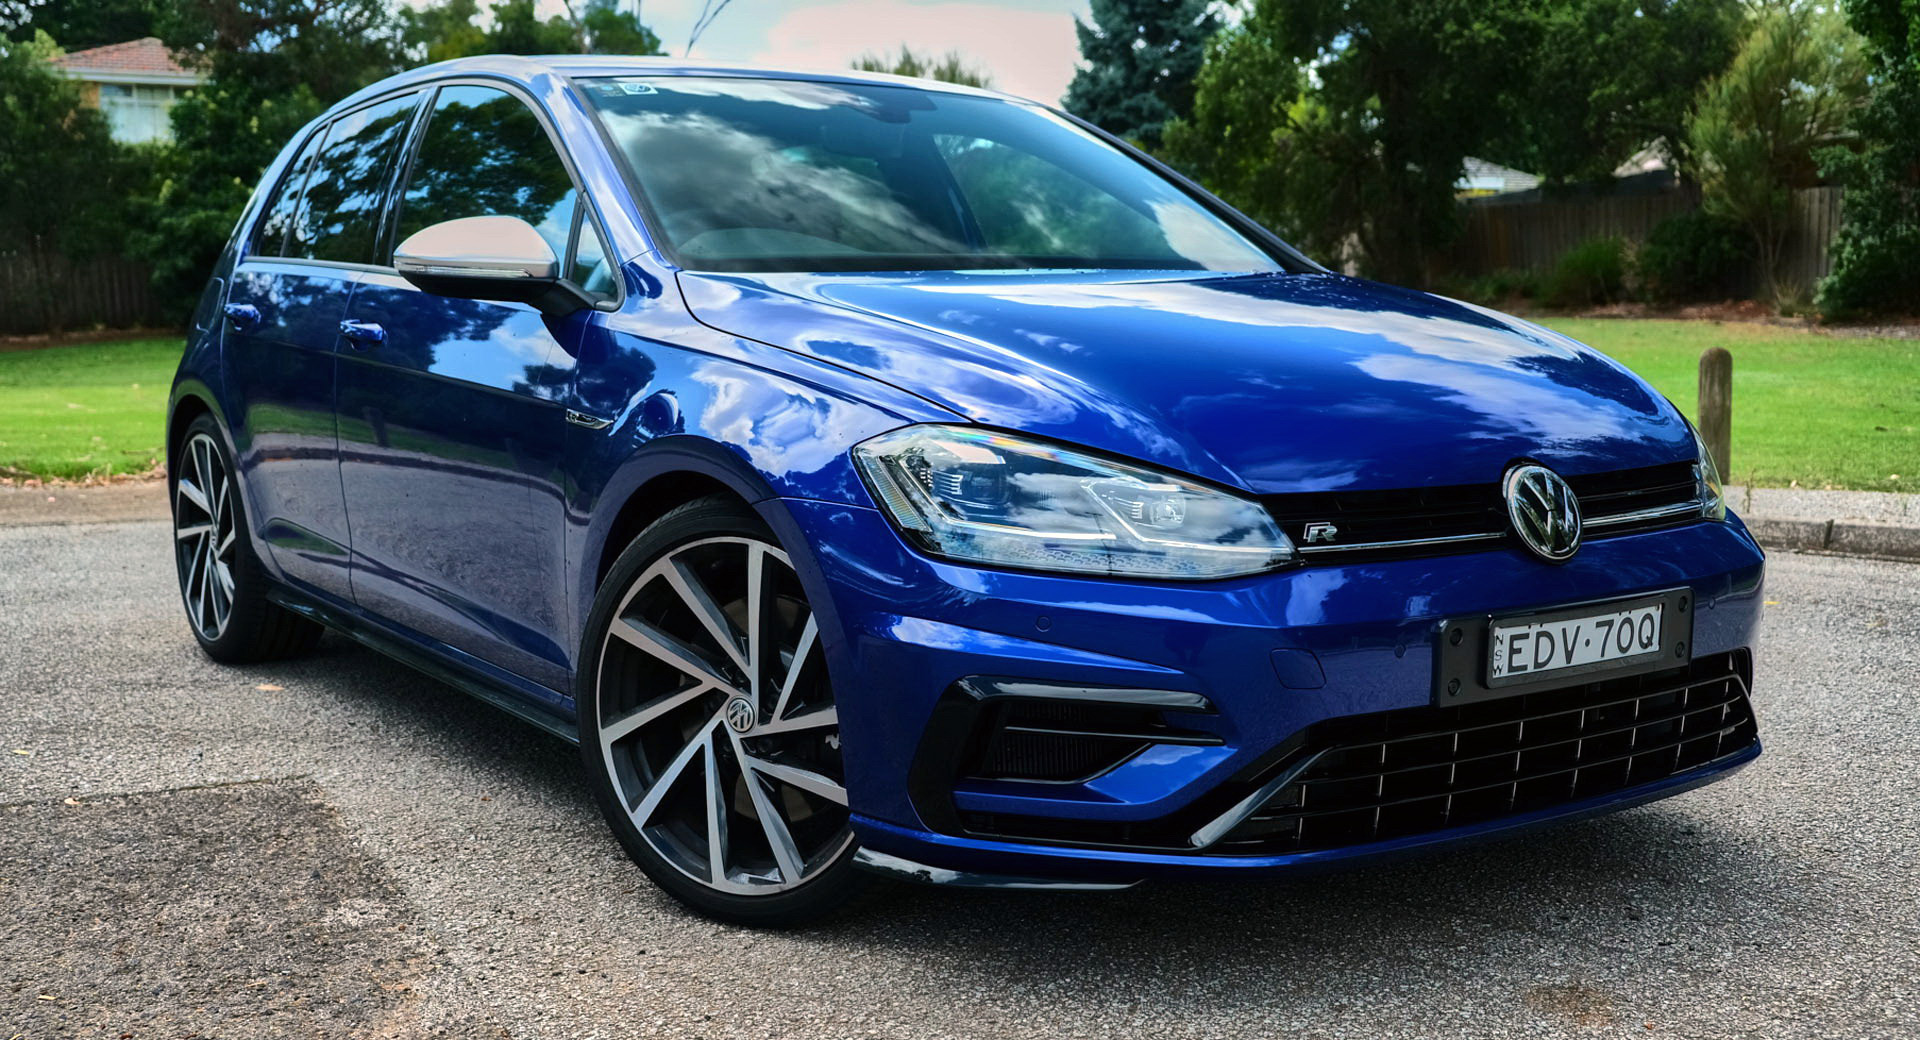 There's A New VW Golf R Mk8 Coming, So We Drove The Old